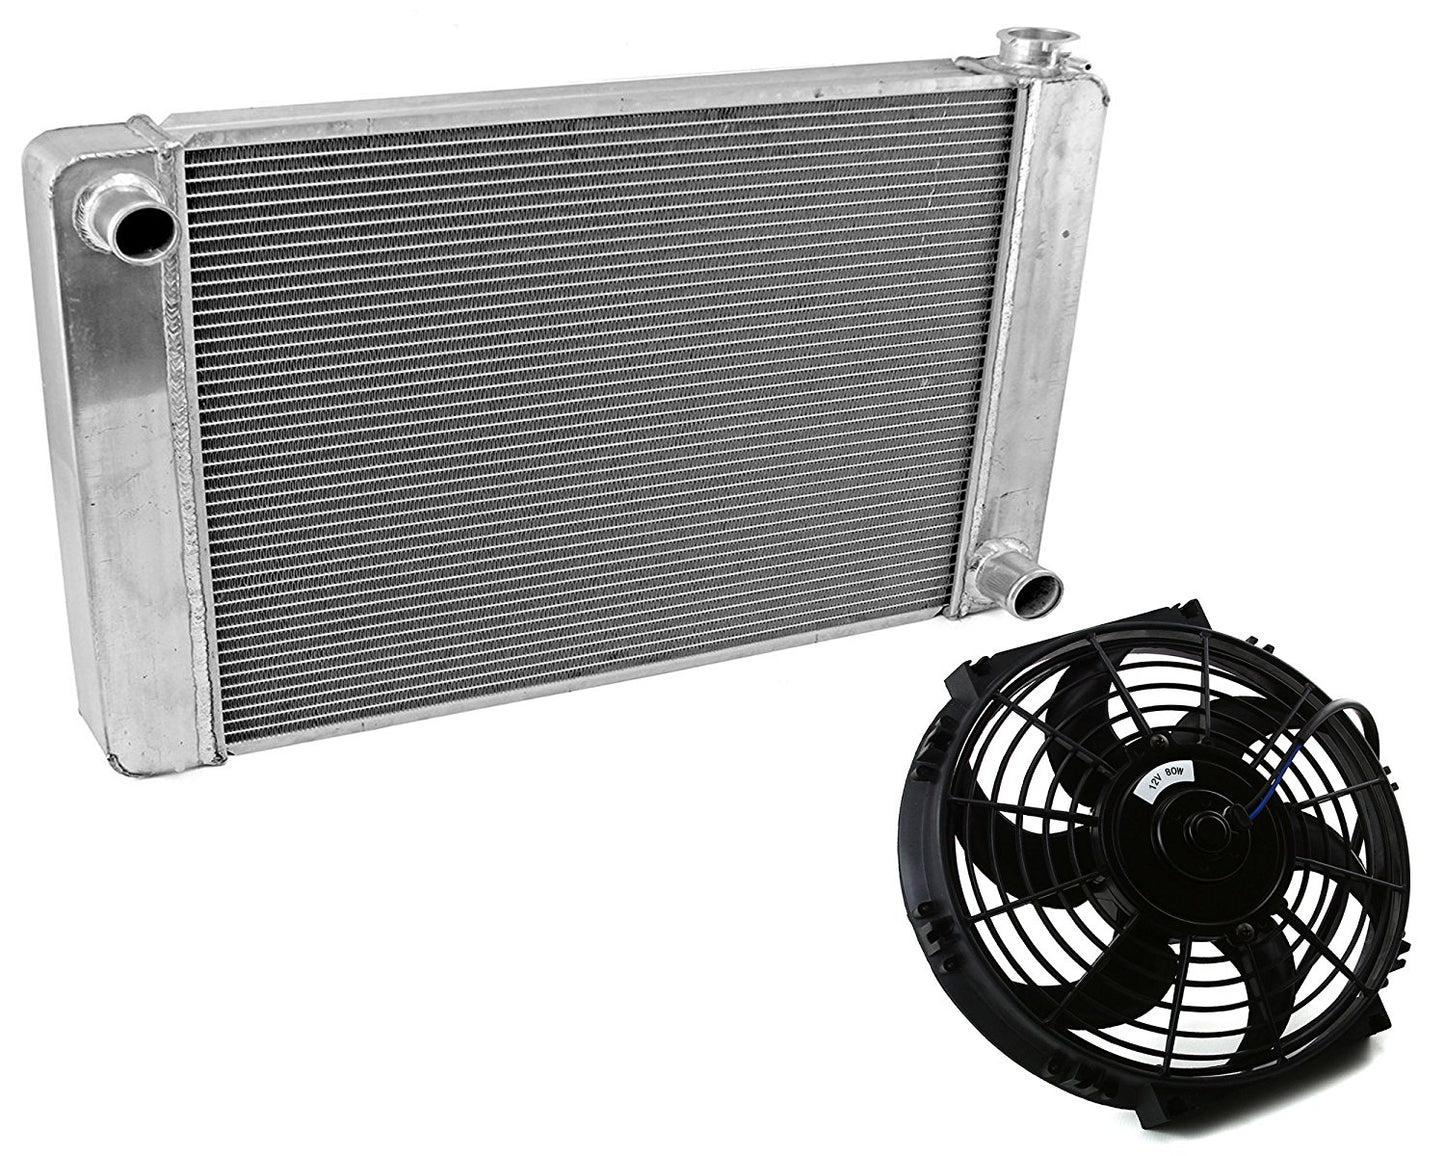 Fabricated Aluminum Radiator 31" x 19" x3" Overall For SBC BBC Chevy GM & 10" Electric Curved Blade Cooling Fan